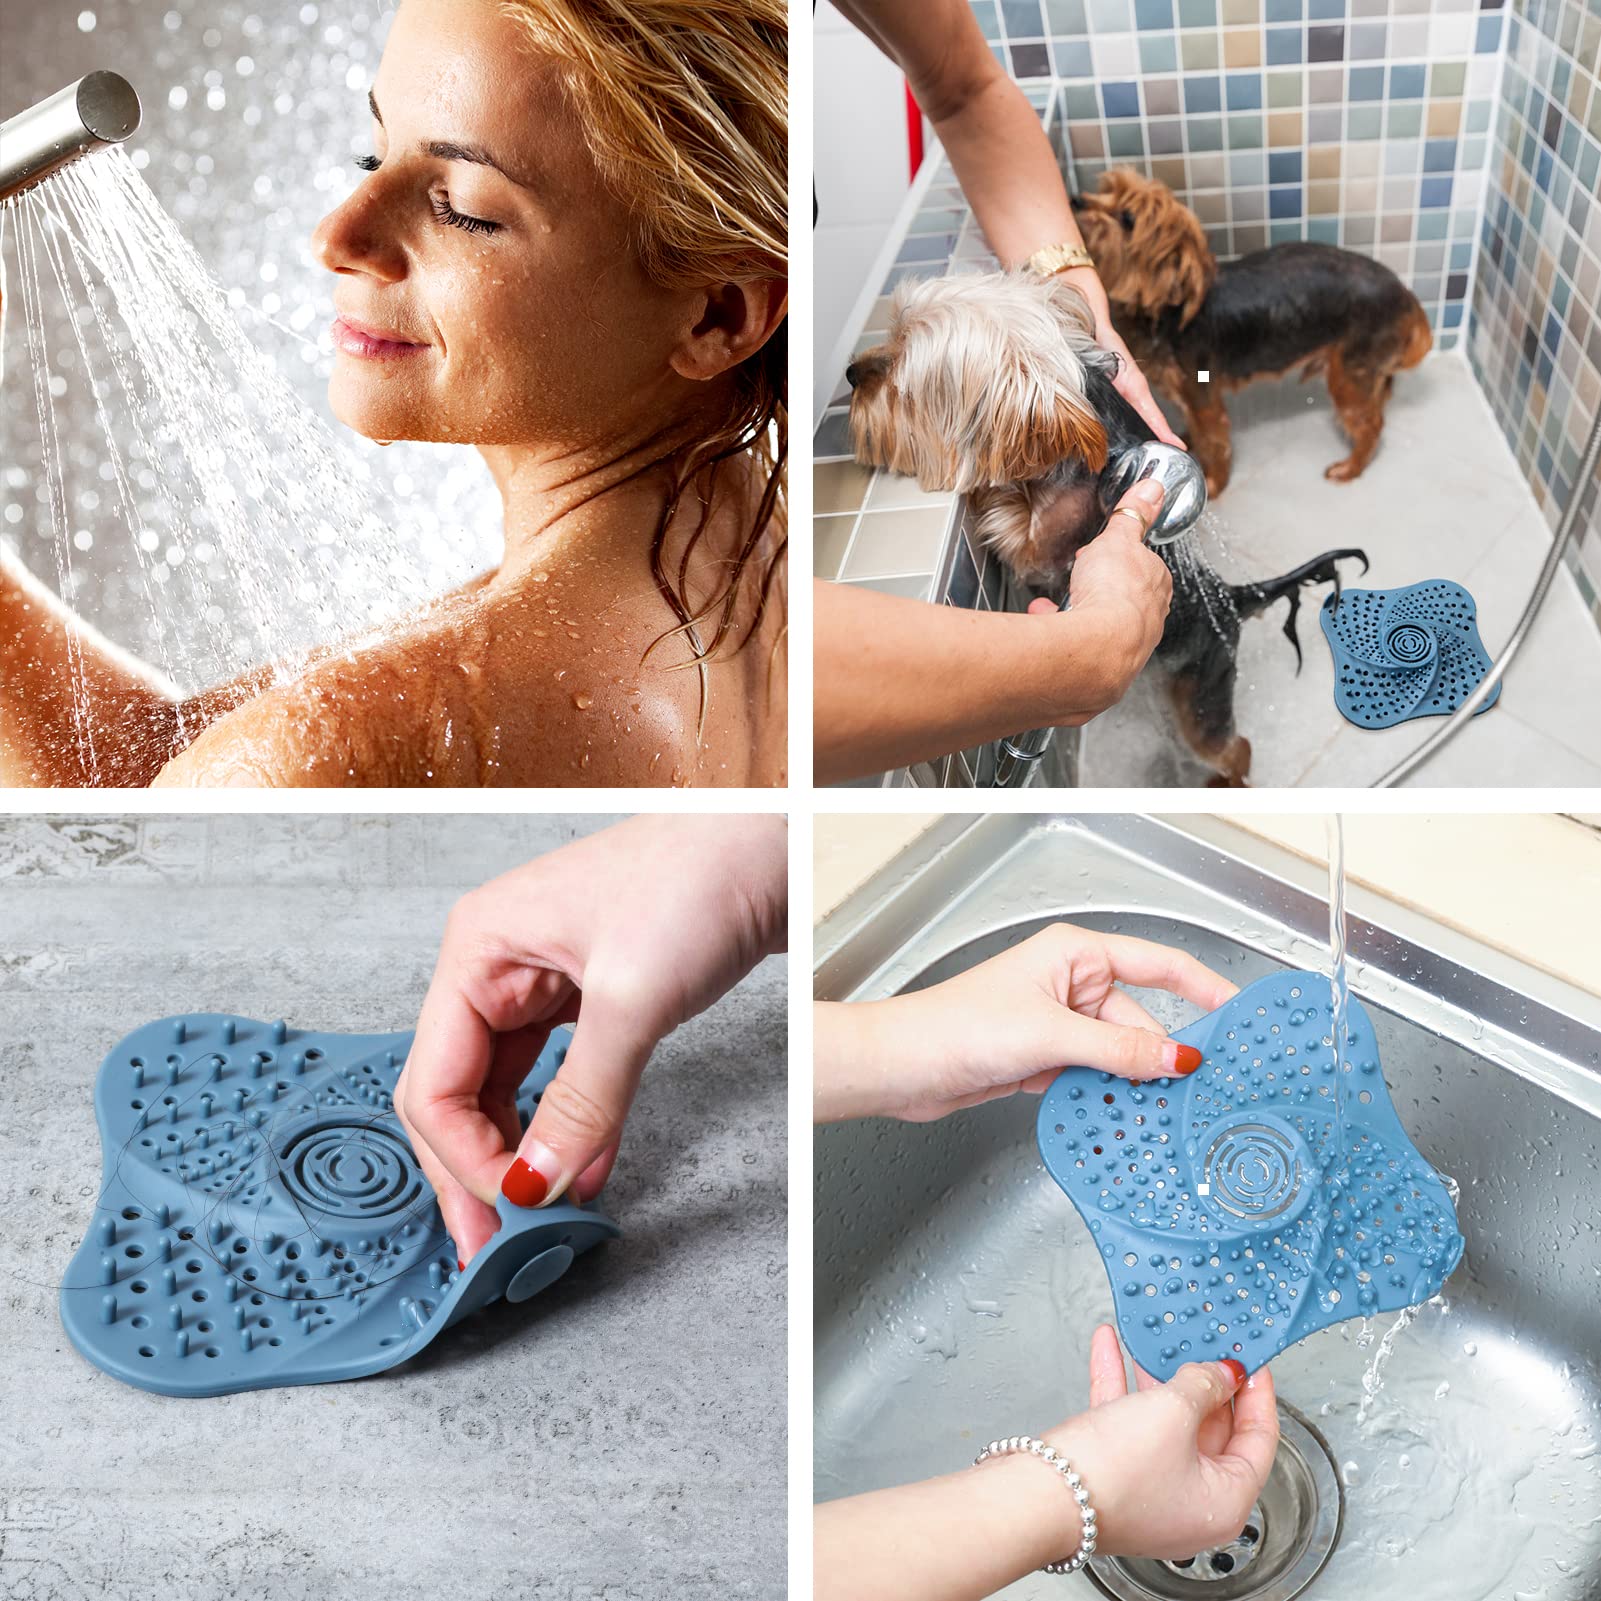 DawnSky Drain Hair Catcher Durable Silicon, 【Upgrade】 Shower Hair Stopper with Suction Cup, Drain Cover Easy to Install and Clean Suit for Bathroom Bathtub and Kitchen 3 Packs